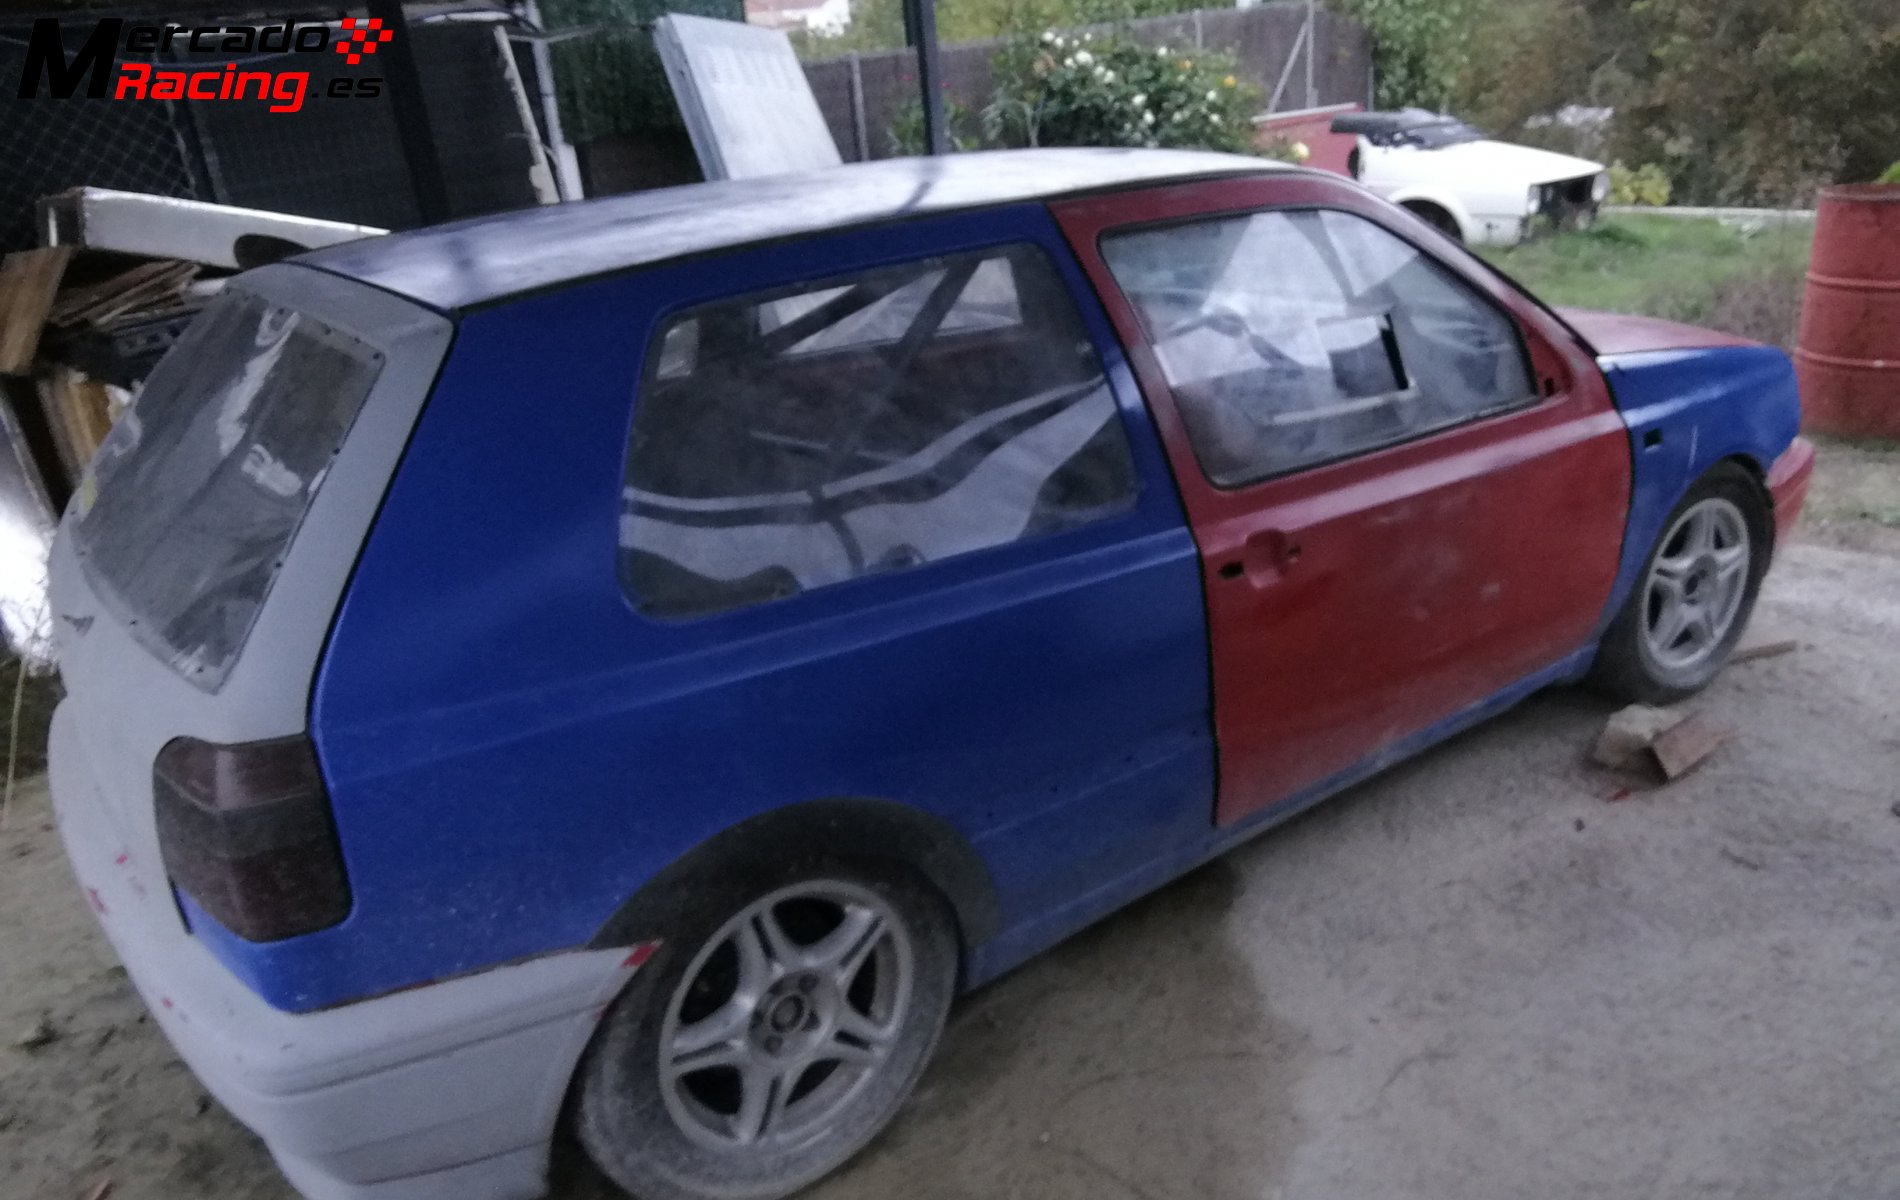 Golf 3 gti proyecto